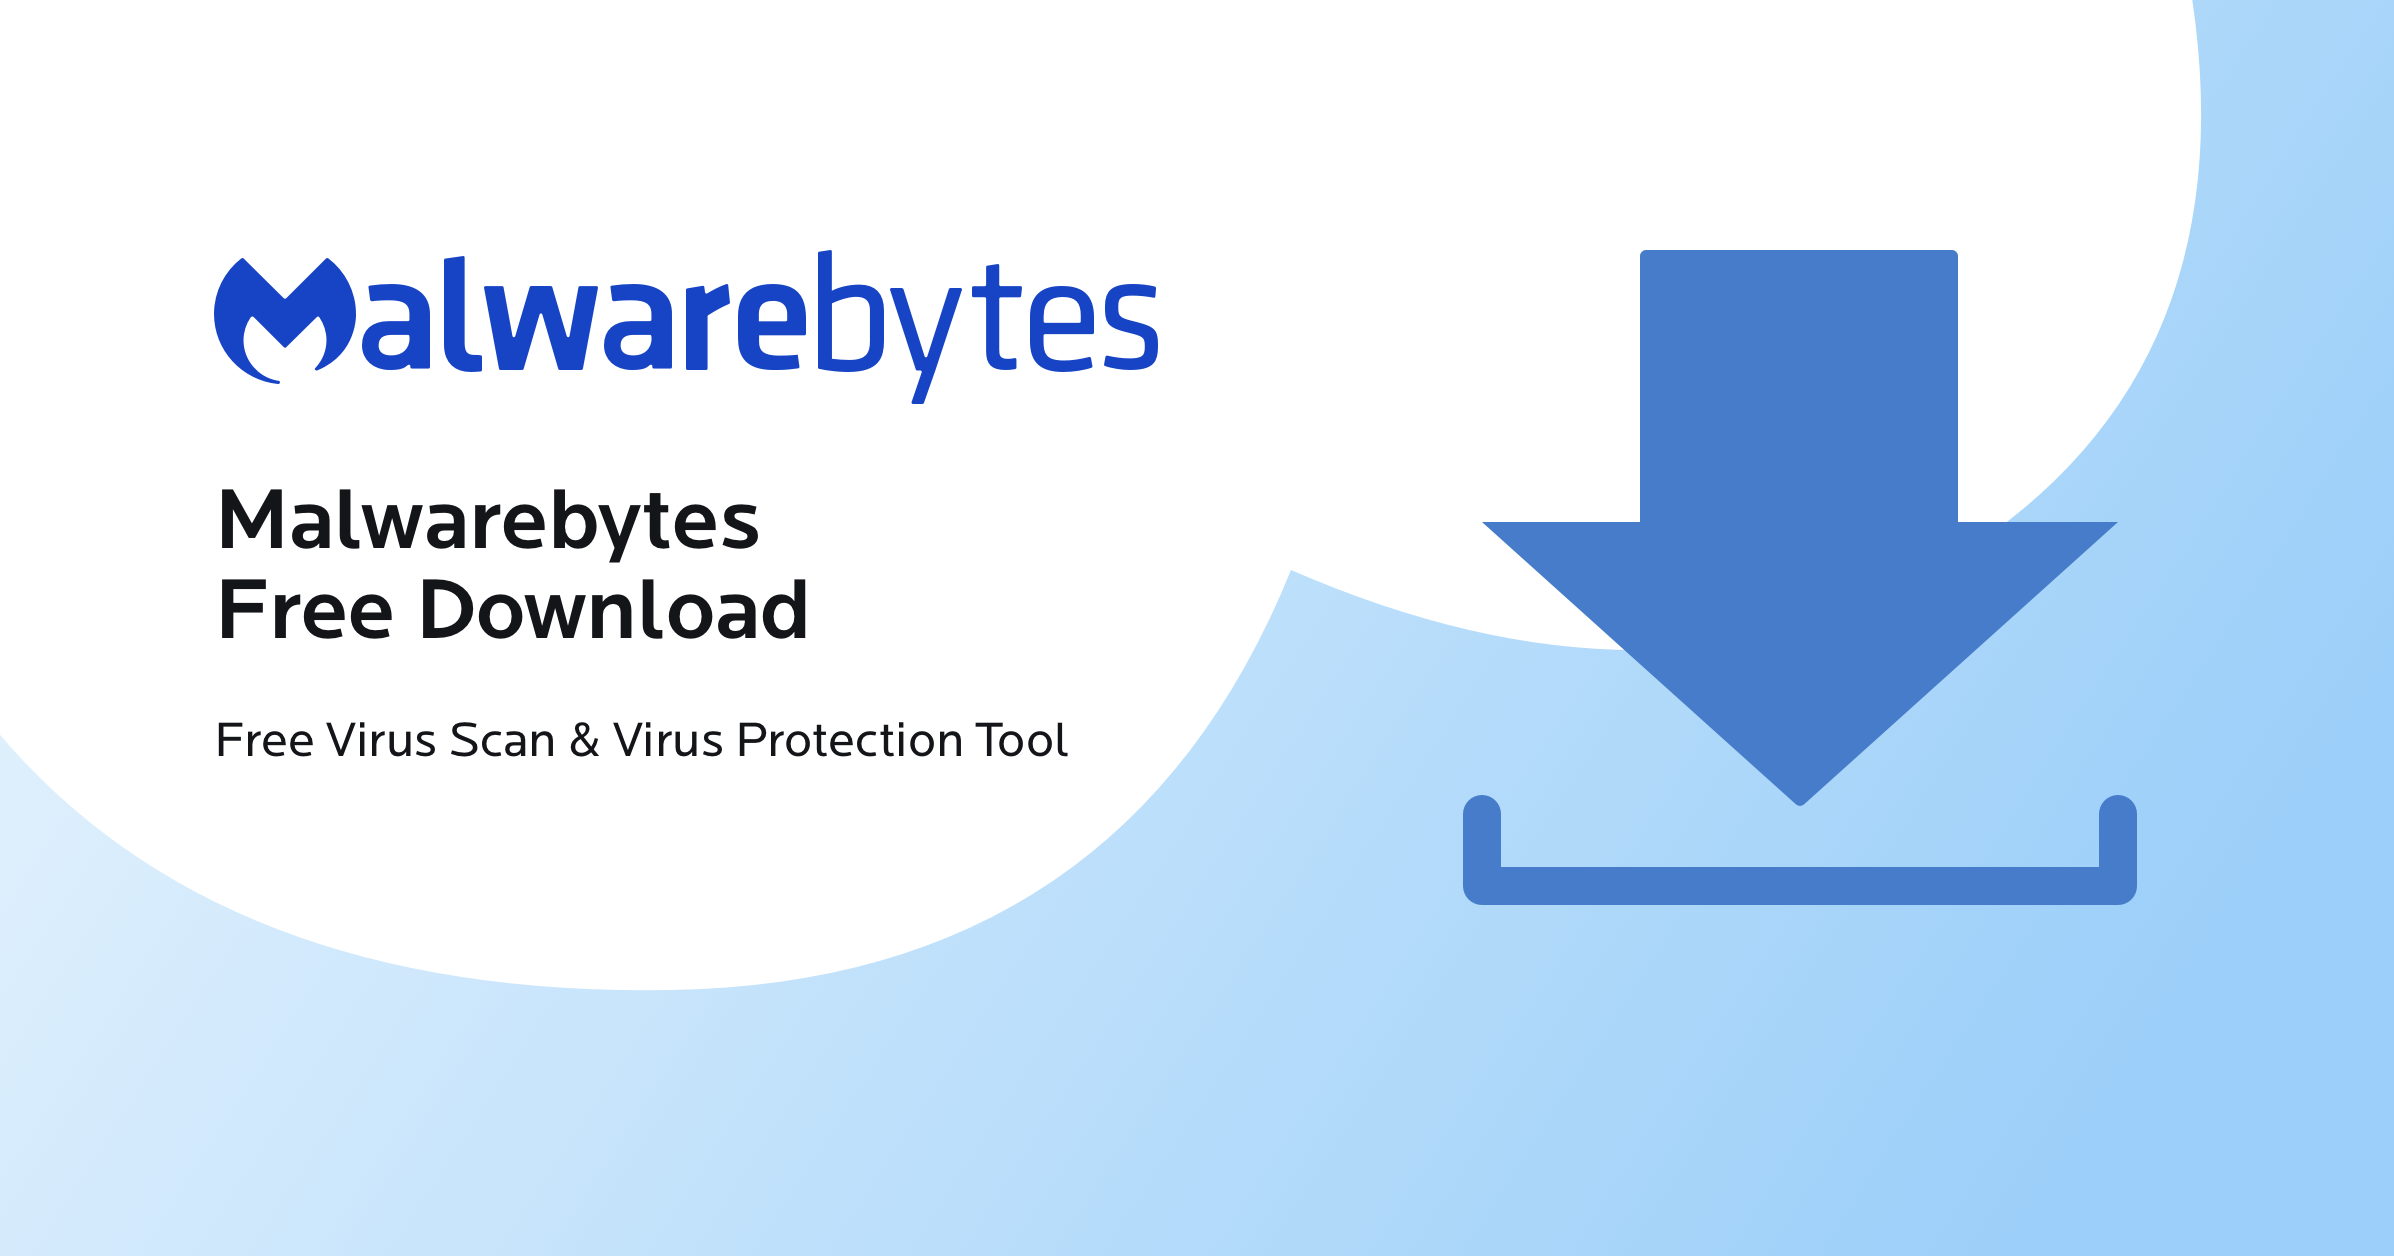 Download and install a reputable removal tool such as Malwarebytes
Open the removal tool